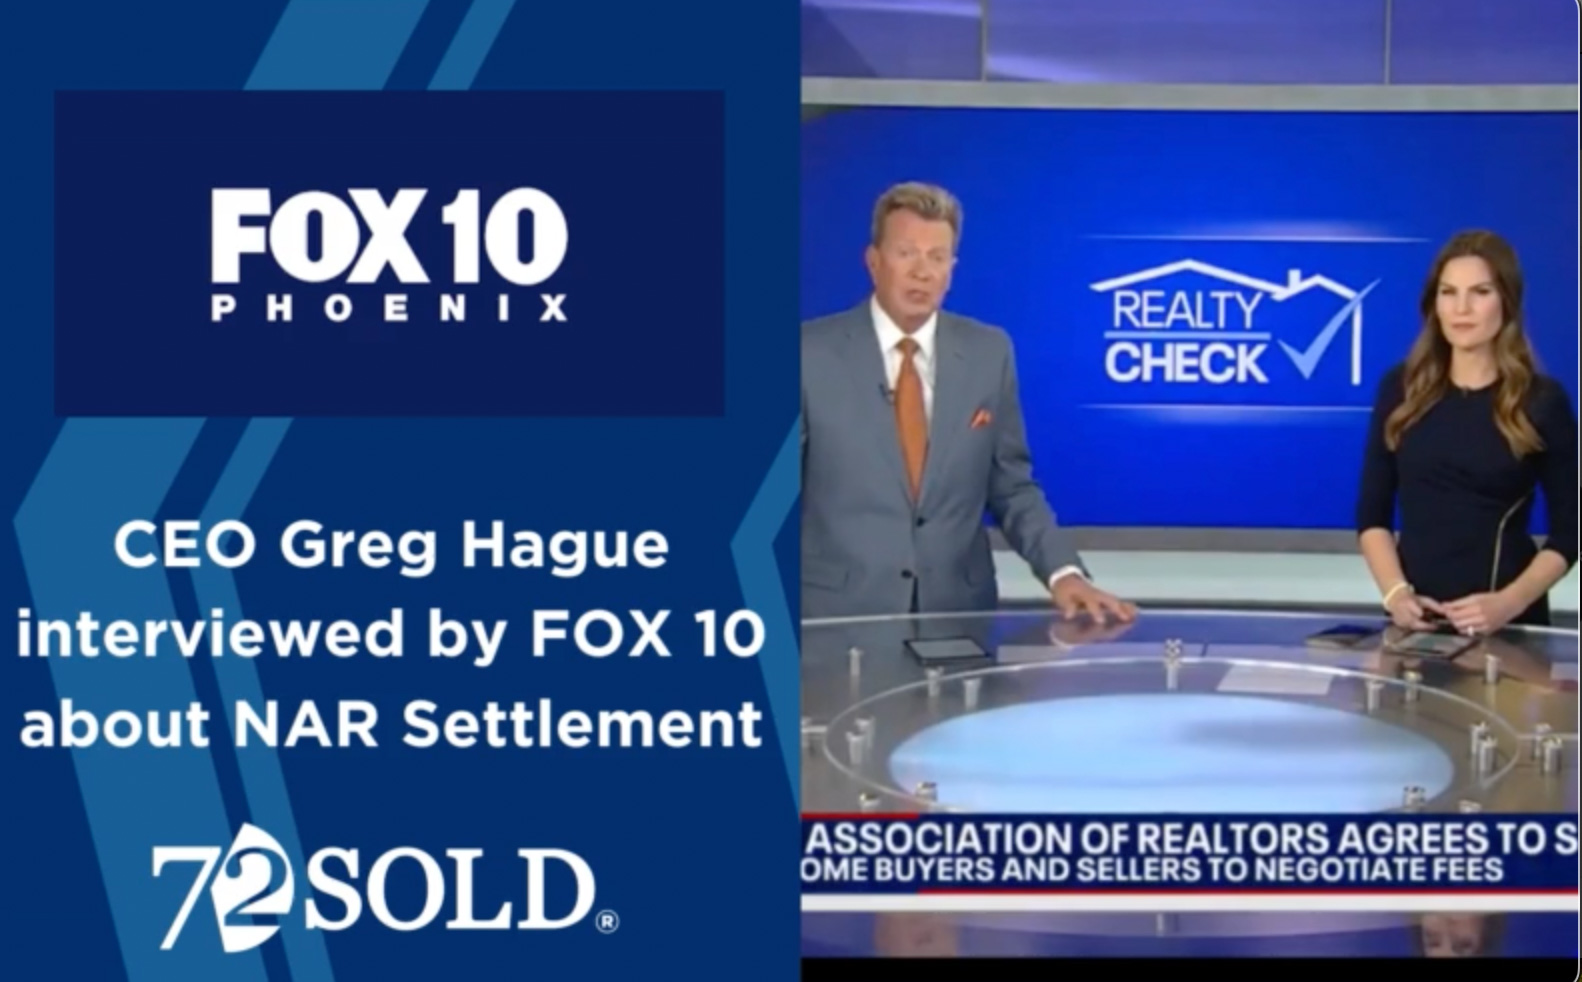 72SOLD CEO on FOX News discussing NAR Settlement